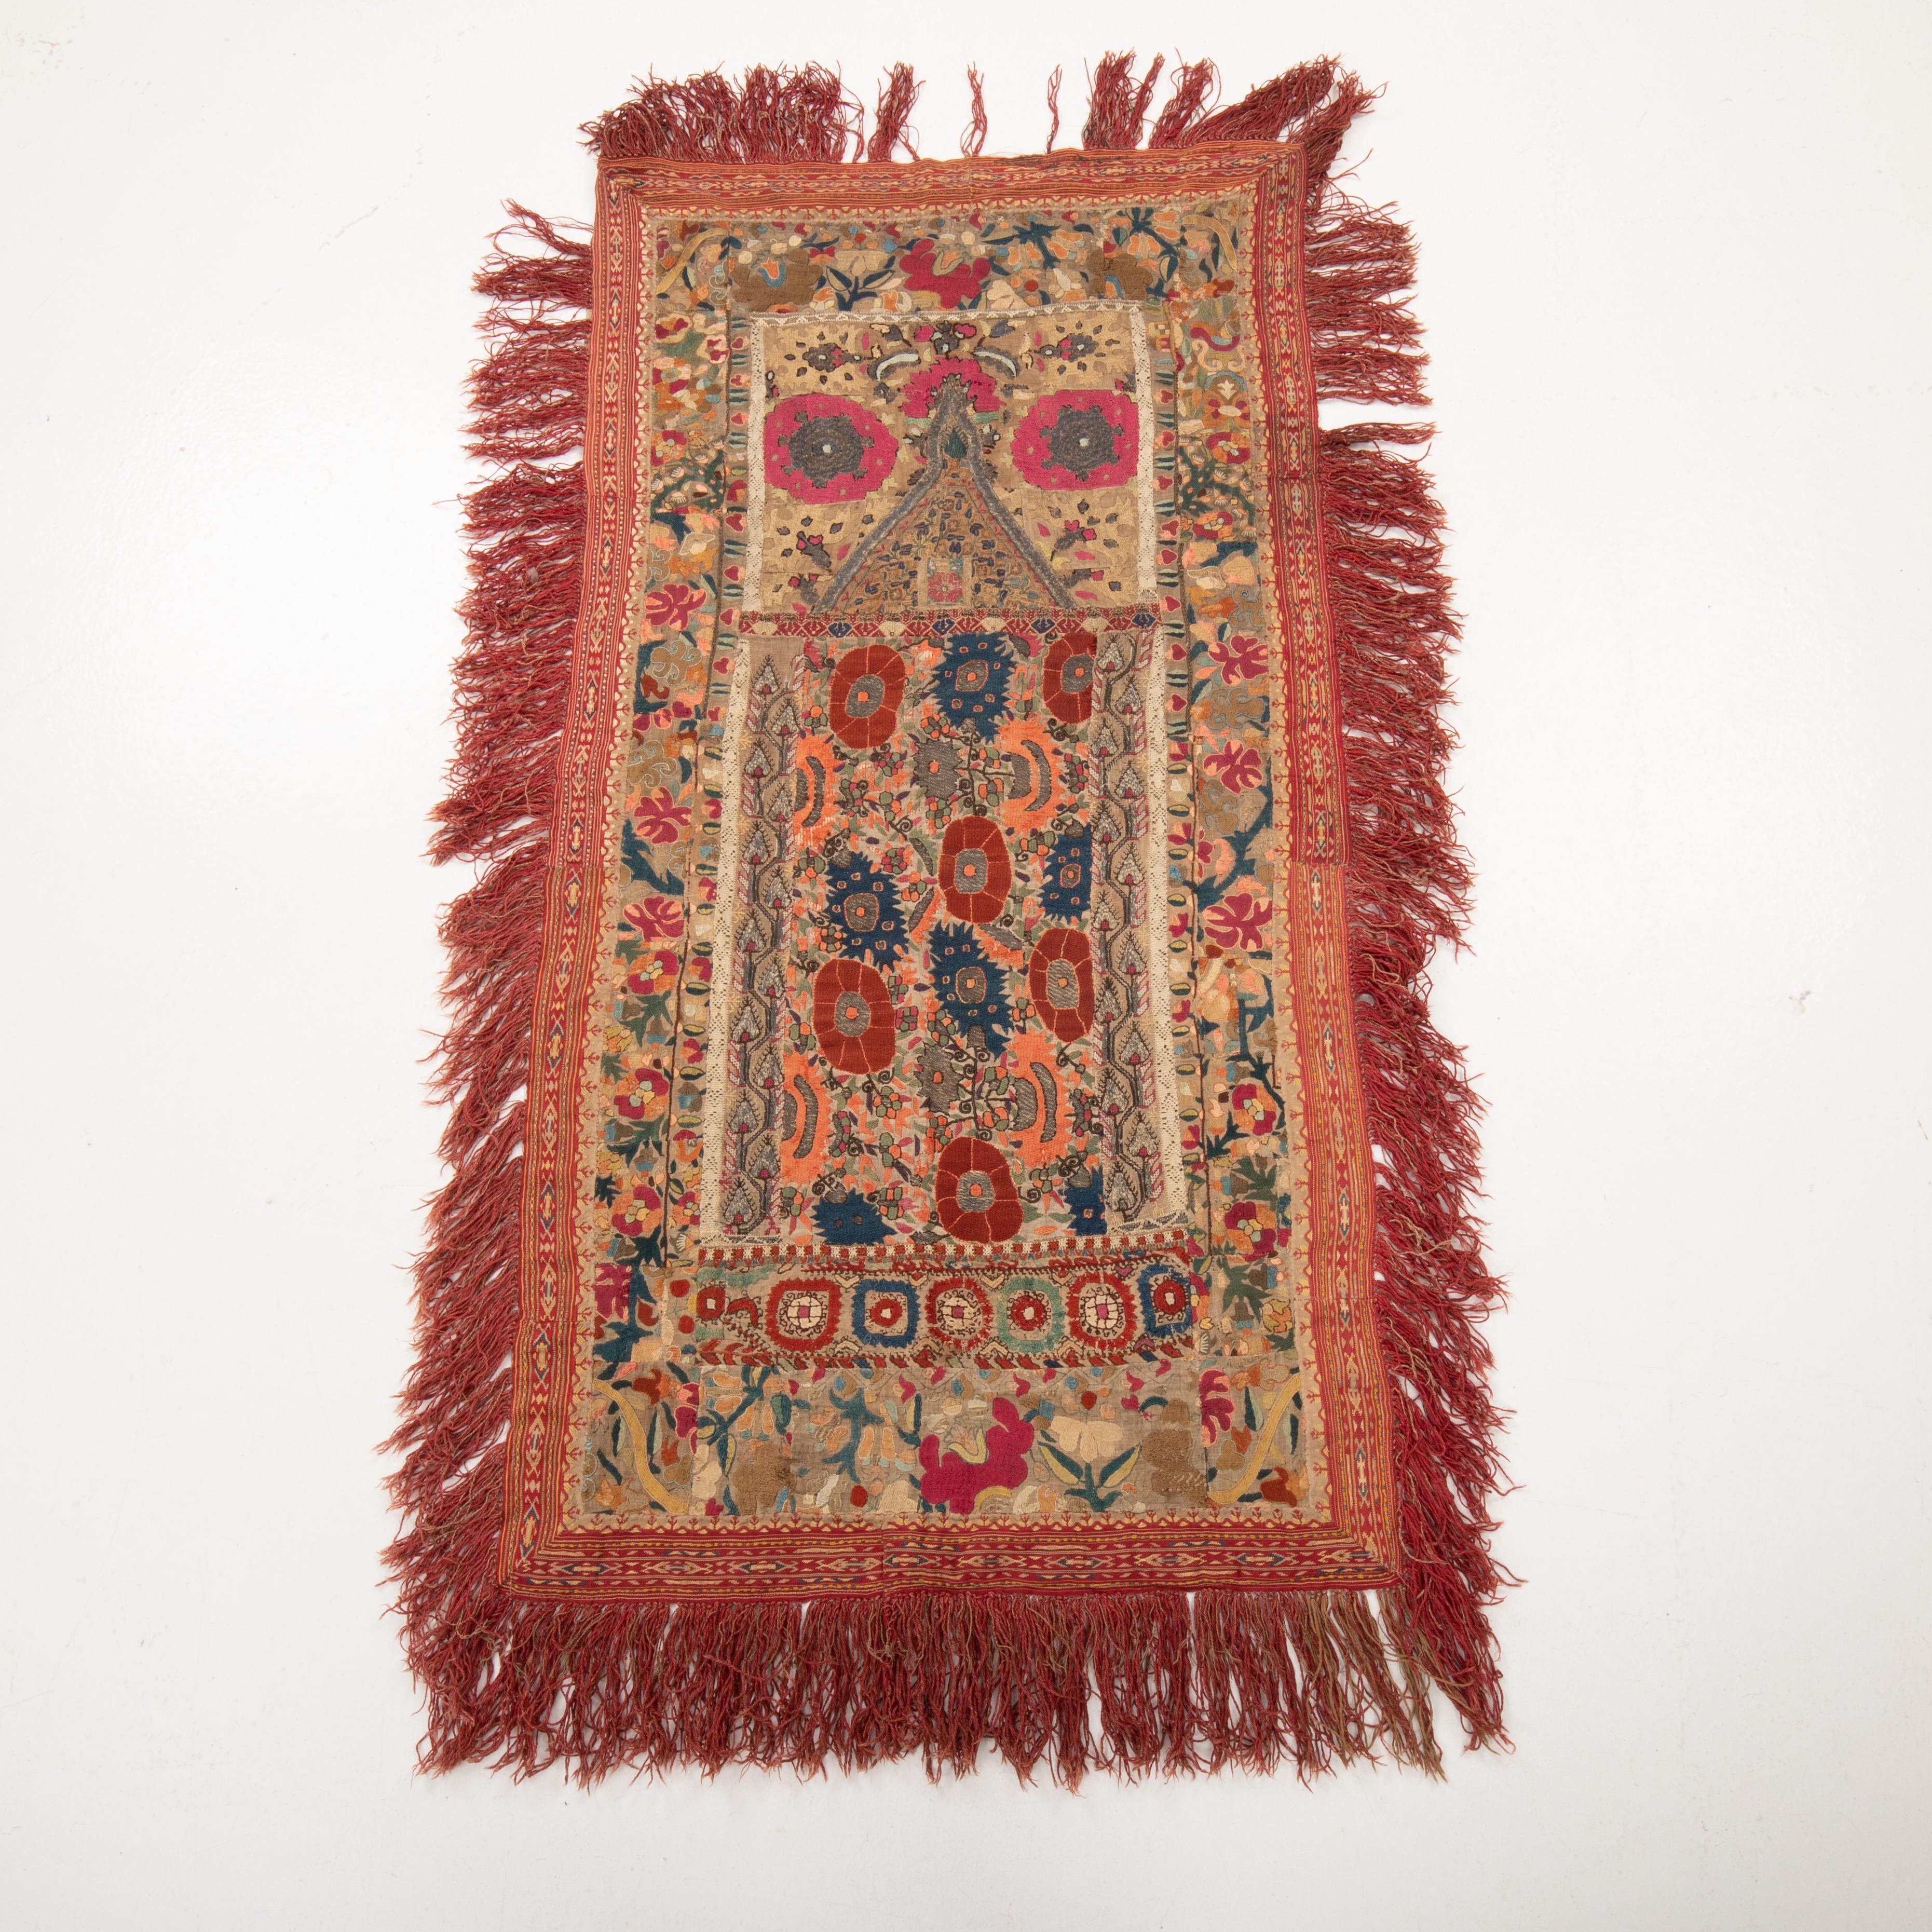 Suzani Prayer Arch made from antique Greek embroidery Fragments in the 19th C. For Sale